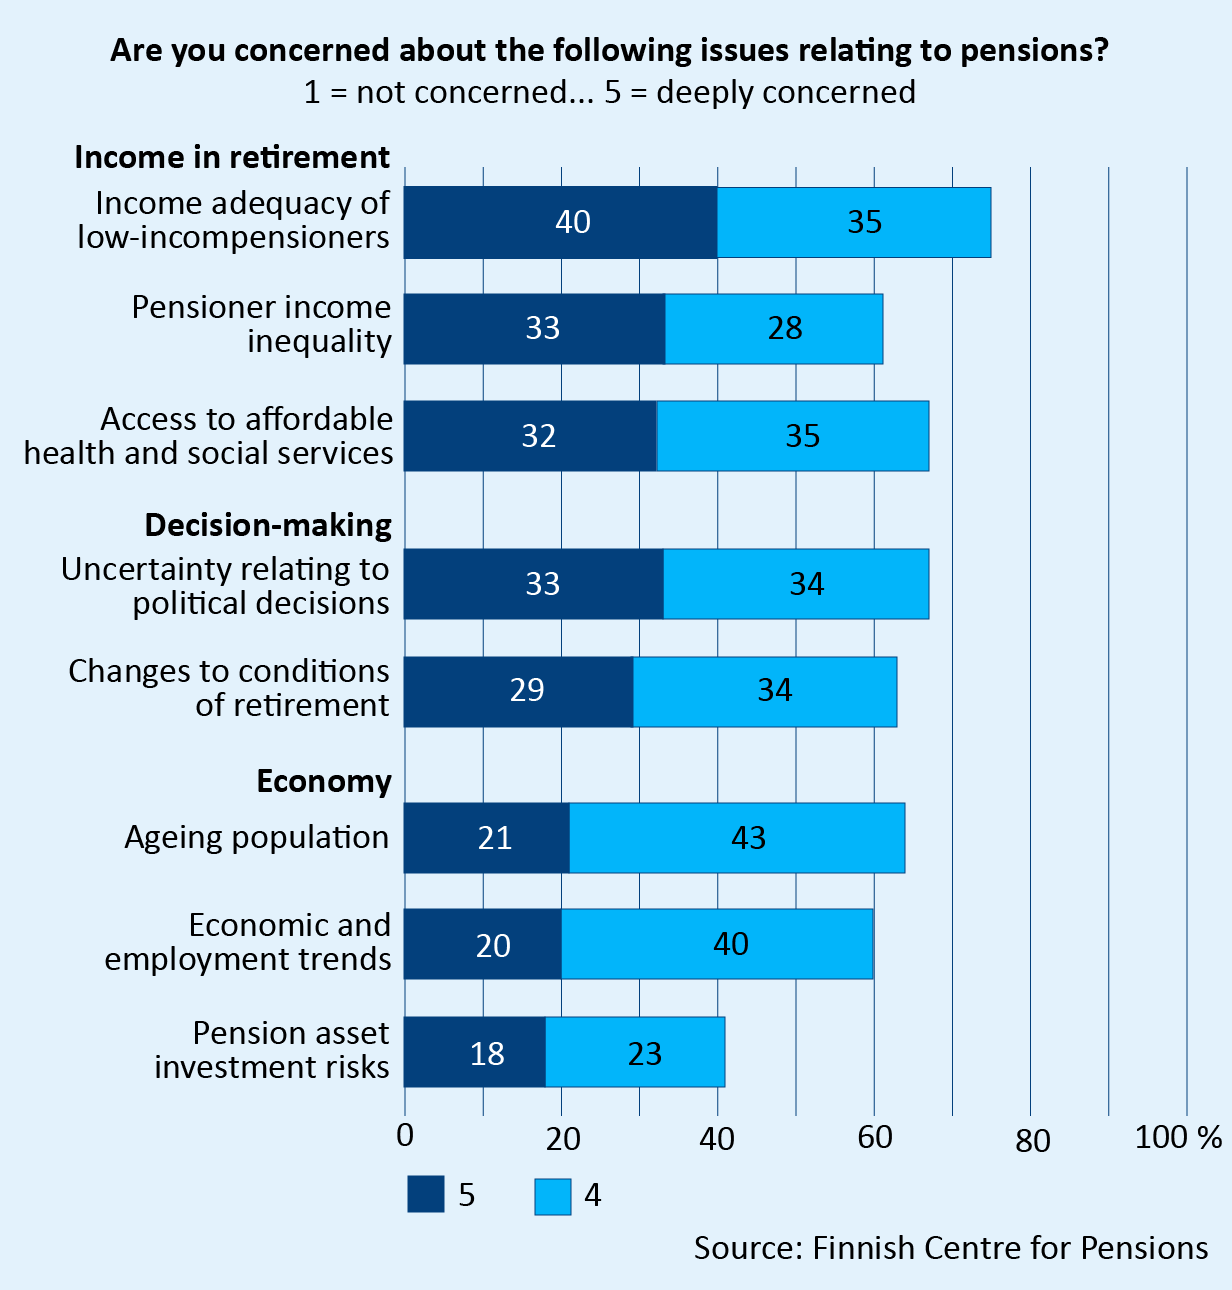 Replies to statement “Are you concerned about the following issues relating to pensions?” For example, 75% of the respondents were fairly concerned or very concerned about the livelihood of low-income pensioners. The study examined the degree of concern for income in retirement, decision making and economic factors. Source: Finnish Centre for Pensions.